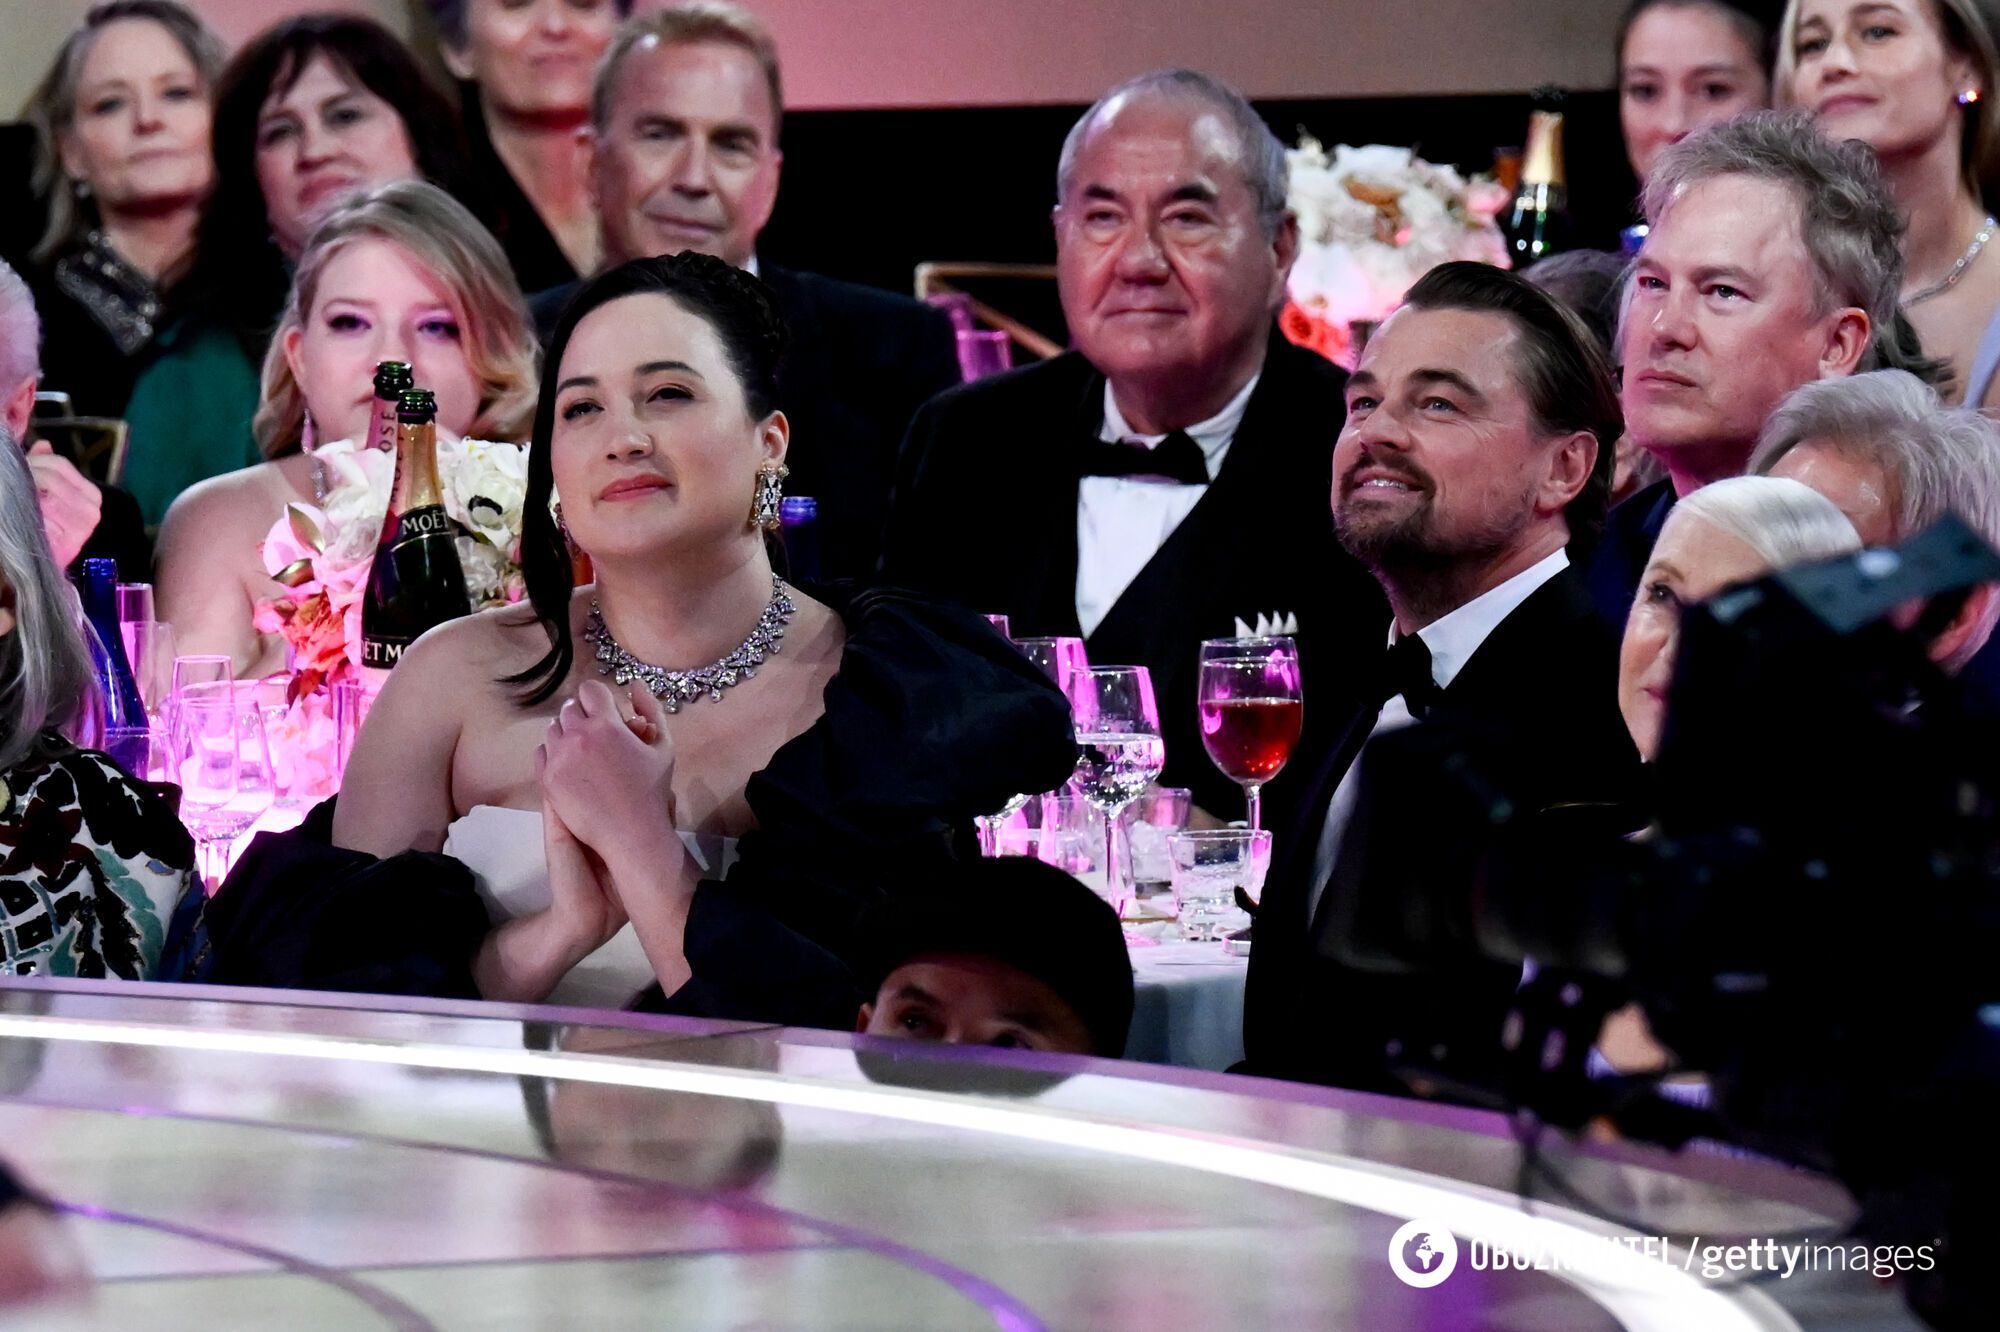 Everyone wanted a photo with Meryl Streep in the bathroom, and DiCaprio and Jared Leto weren't allowed at the table: Golden Globes highlights that didn't make it to the airwaves